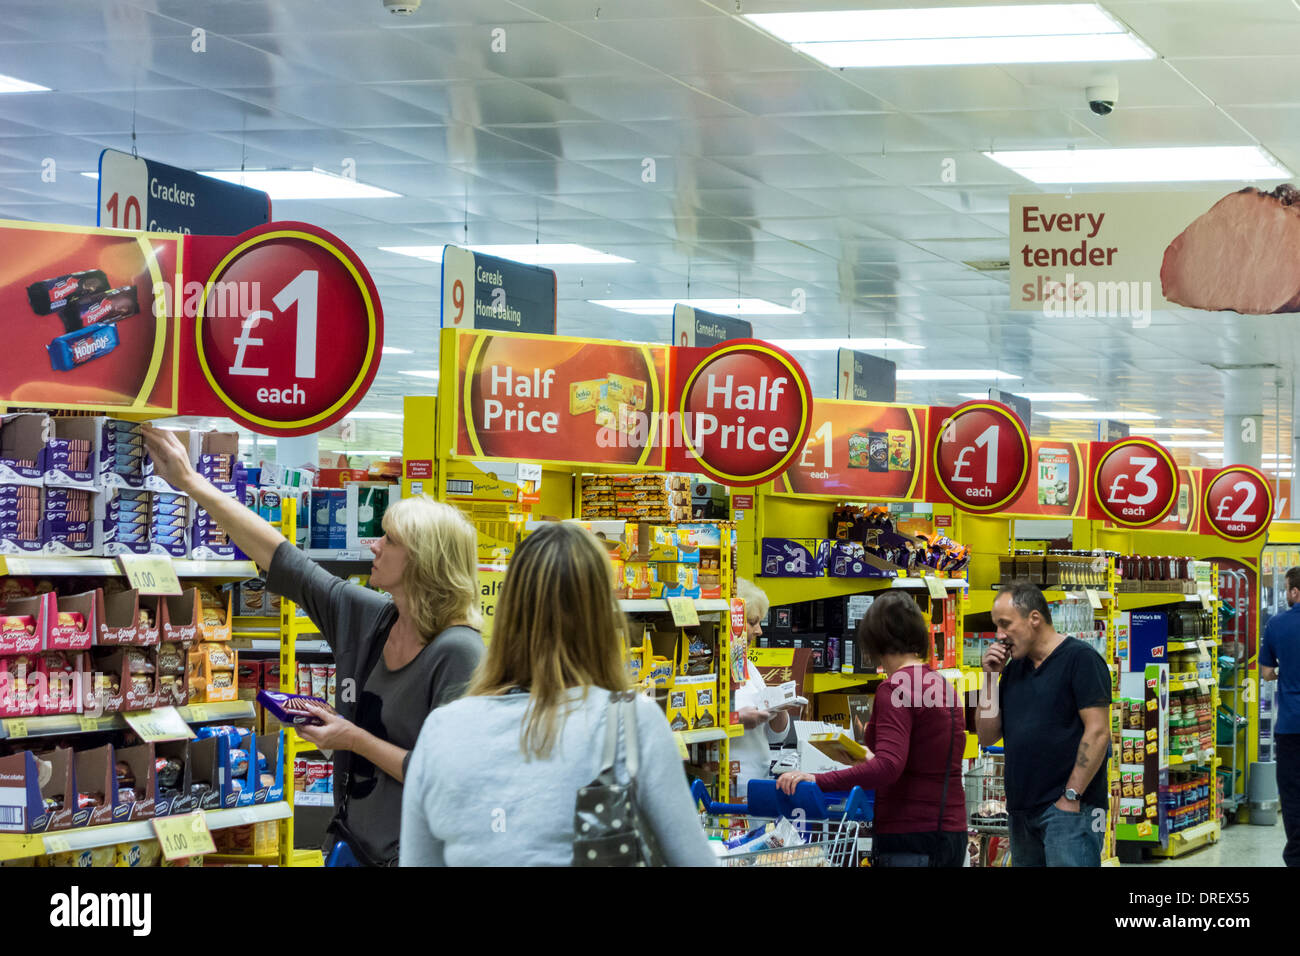 Shoppers and offer signs at Tesco Supermarket, UK Stock Photo